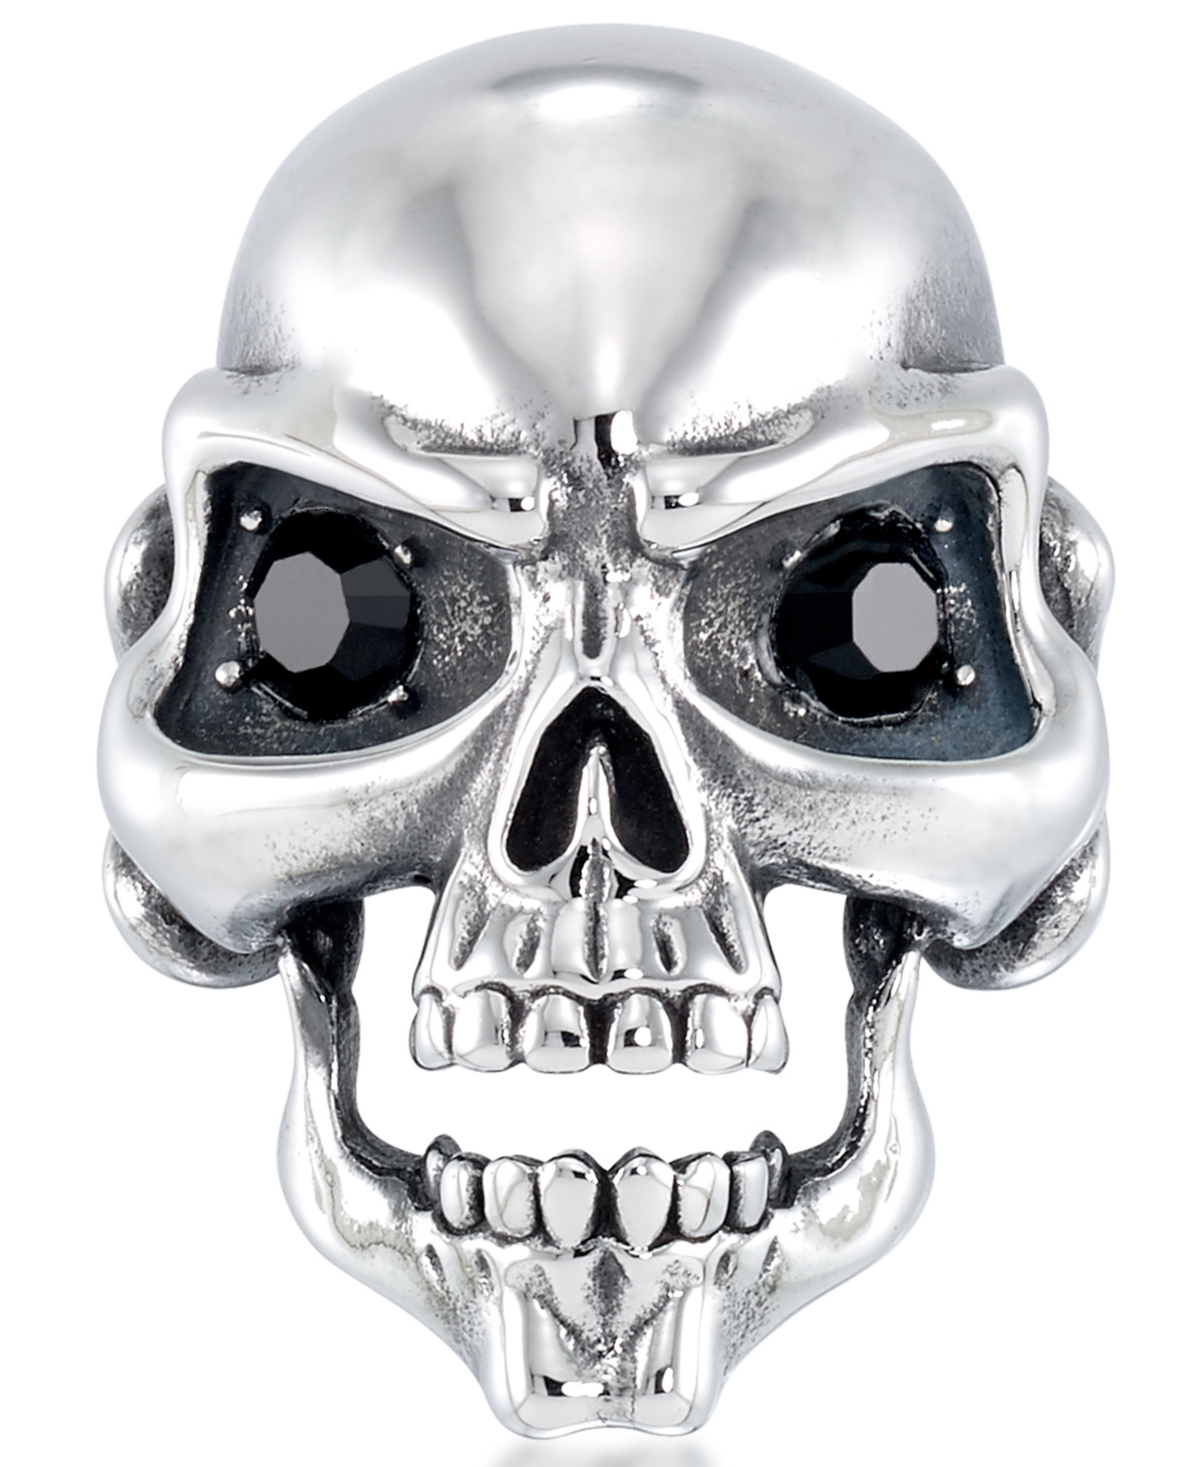 Men's Cubic Zirconia Signature Skull Ring in Stainless Steel - Stainless Steel